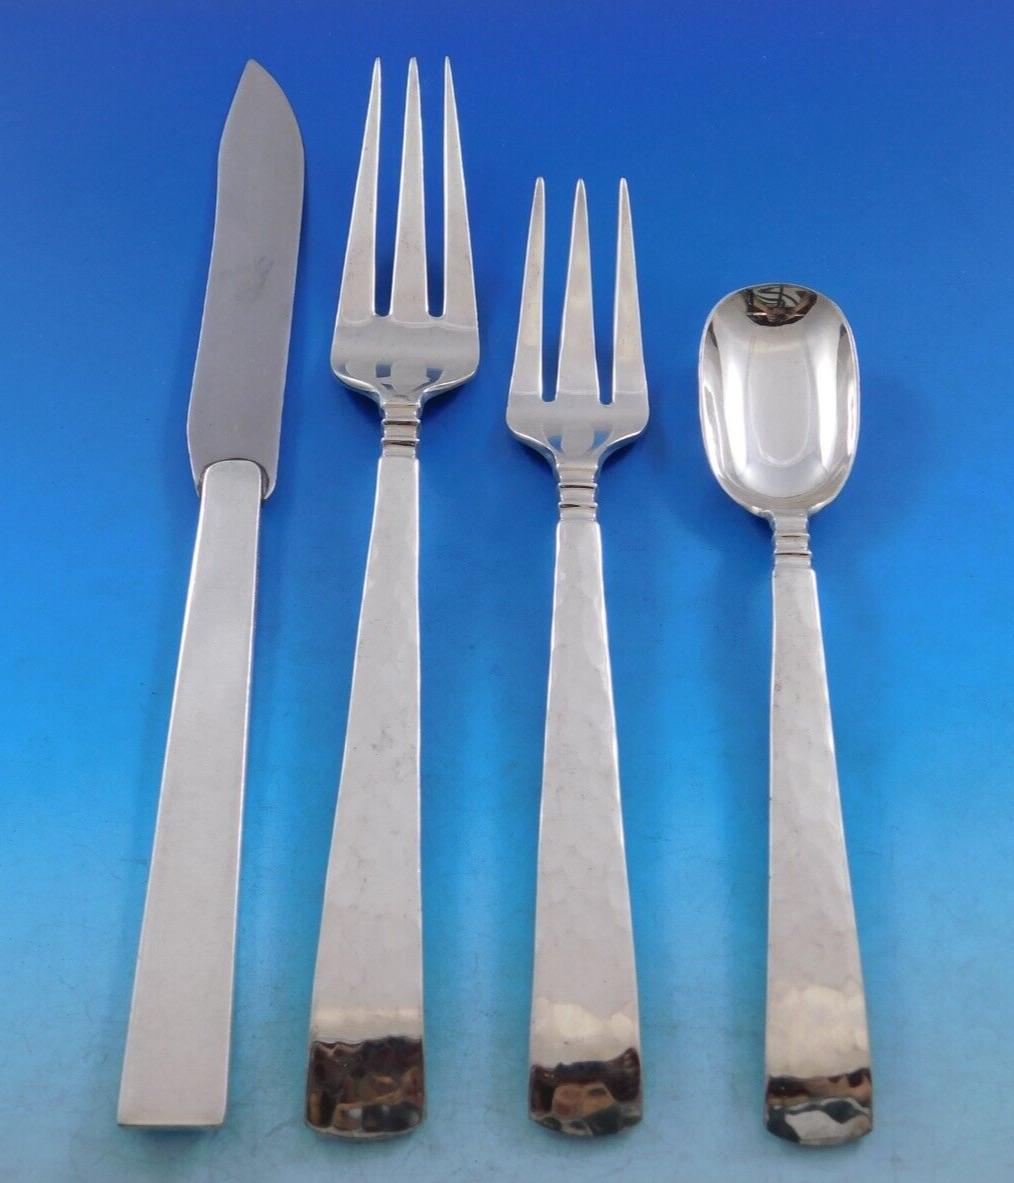 Codan Mexican sterling silver dinner flatware set with subtle hand hammered finish, 51 pieces total (including 10 dinner knives by Allan Adler). This set includes:

10 Dinner size knives, solid handles with stainless blades, 9 3/8